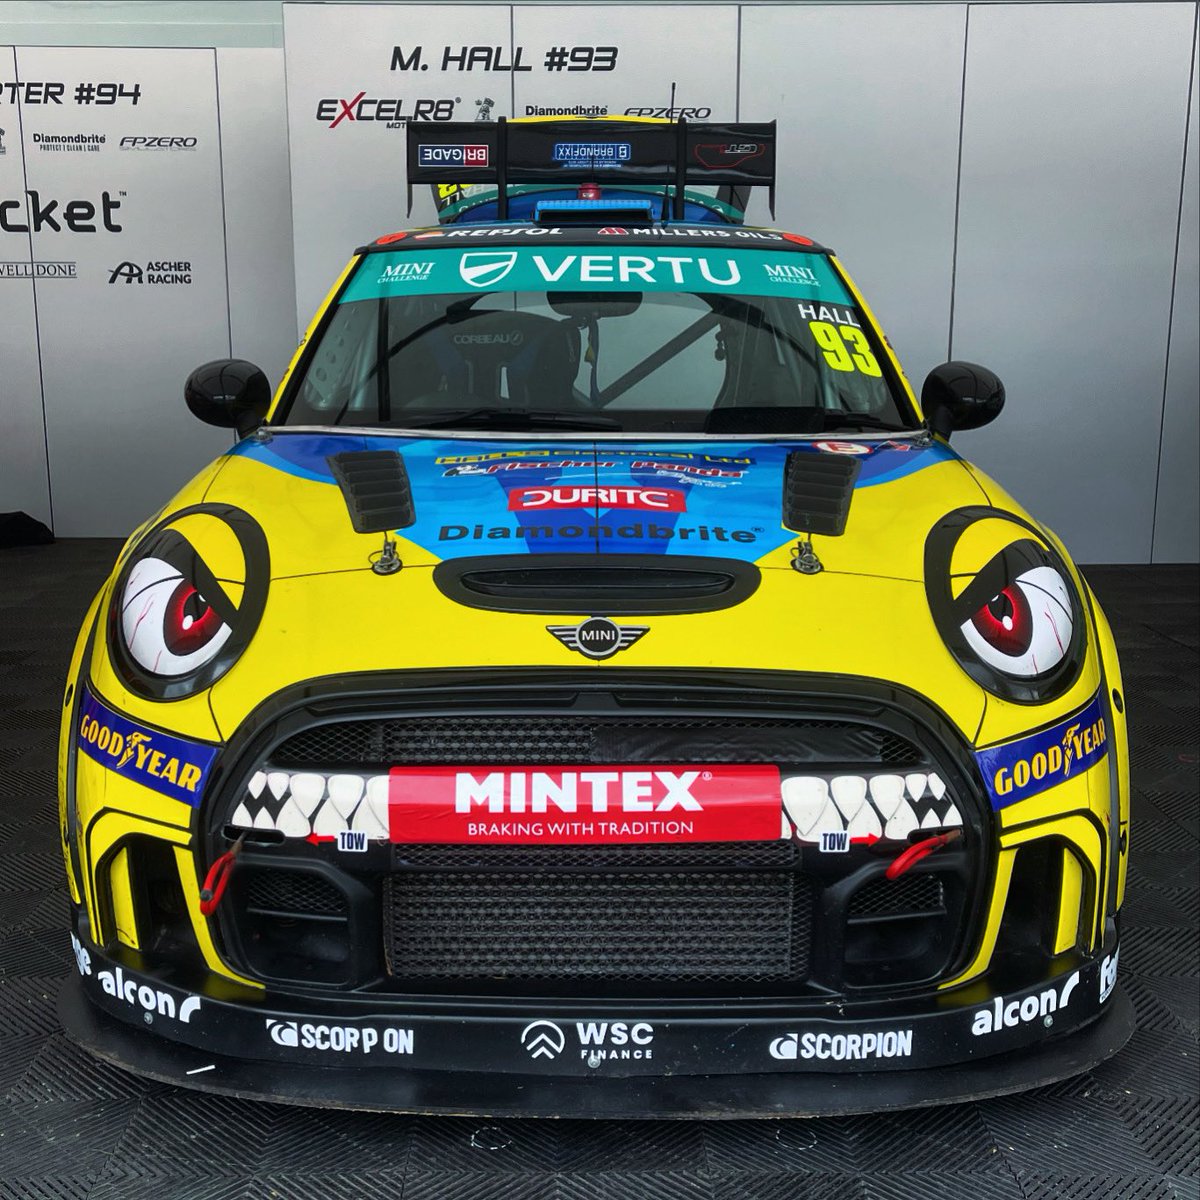 I absolutely LOVE this @MINIChallengeUK livery. 😠

If I saw this in my rear view mirror, I’d let it pass by @Excelr8M 

#MINI #excelr8motorsport